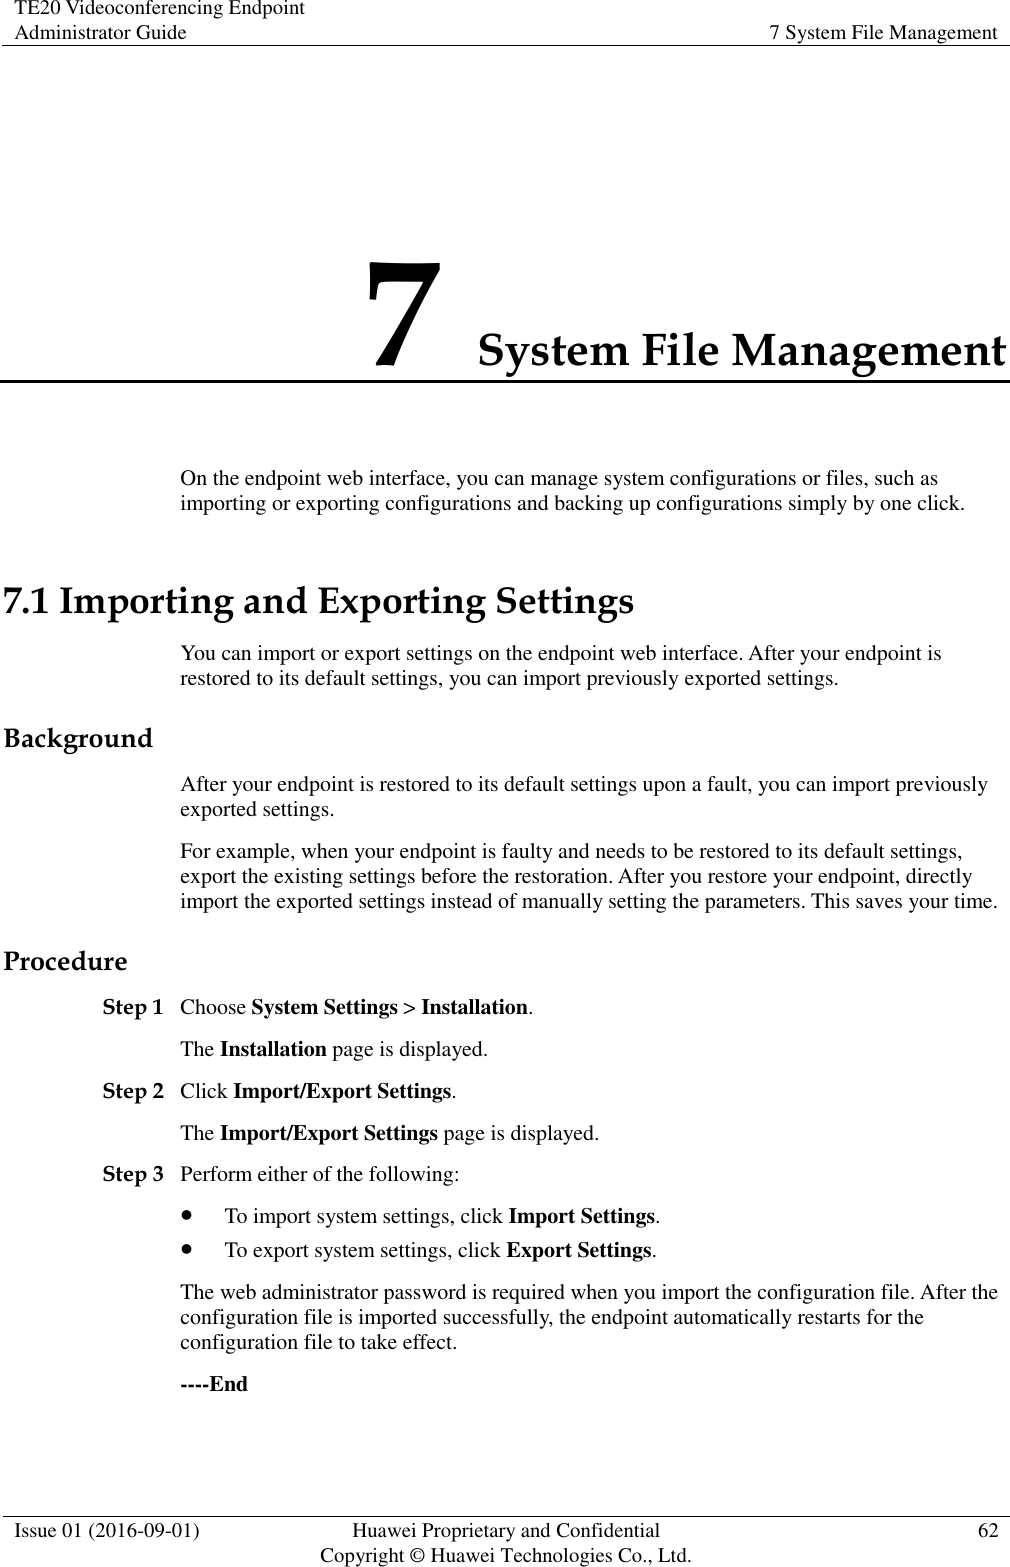 TE20 Videoconferencing Endpoint Administrator Guide 7 System File Management  Issue 01 (2016-09-01) Huawei Proprietary and Confidential                                     Copyright © Huawei Technologies Co., Ltd. 62  7 System File Management On the endpoint web interface, you can manage system configurations or files, such as importing or exporting configurations and backing up configurations simply by one click. 7.1 Importing and Exporting Settings You can import or export settings on the endpoint web interface. After your endpoint is restored to its default settings, you can import previously exported settings.   Background After your endpoint is restored to its default settings upon a fault, you can import previously exported settings.   For example, when your endpoint is faulty and needs to be restored to its default settings, export the existing settings before the restoration. After you restore your endpoint, directly import the exported settings instead of manually setting the parameters. This saves your time.   Procedure Step 1 Choose System Settings &gt; Installation. The Installation page is displayed. Step 2 Click Import/Export Settings. The Import/Export Settings page is displayed. Step 3 Perform either of the following:  To import system settings, click Import Settings.  To export system settings, click Export Settings. The web administrator password is required when you import the configuration file. After the configuration file is imported successfully, the endpoint automatically restarts for the configuration file to take effect. ----End 